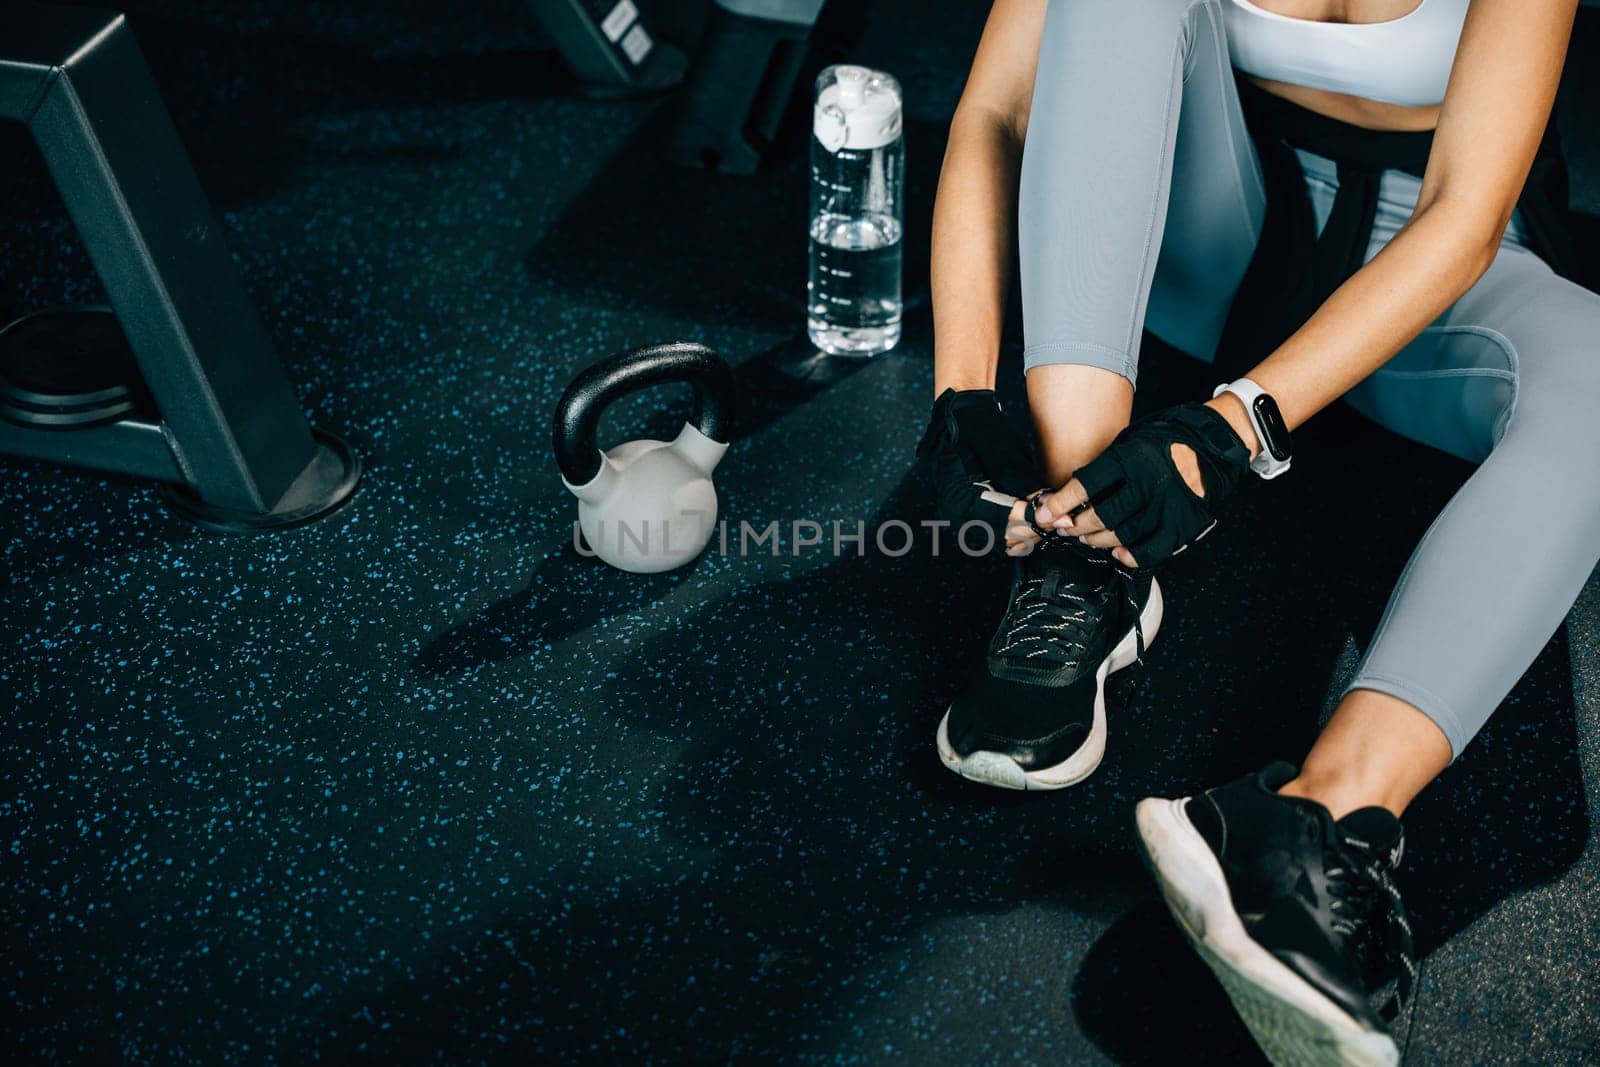 Close-up of a young woman tying her shoelaces before hitting the gym. The shot captures her slim legs and stylish sneakers. Fitness and fashion concept.